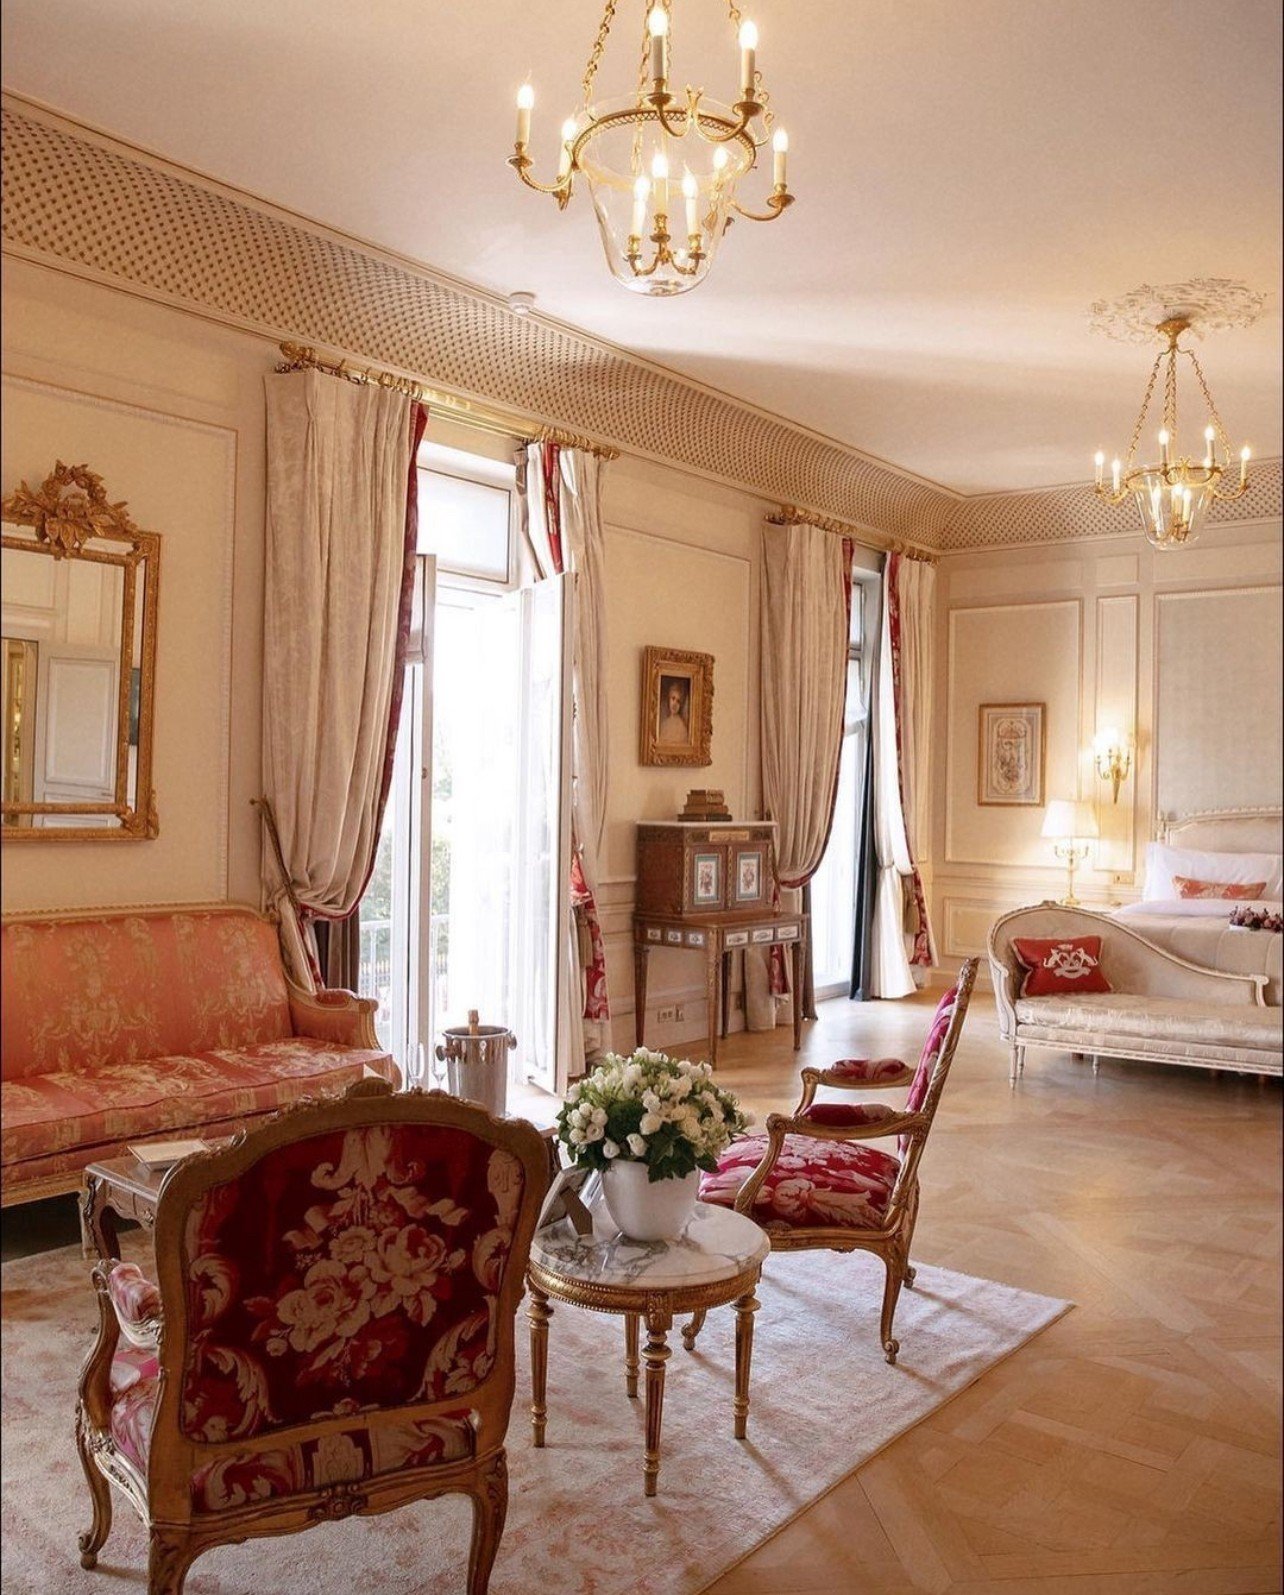 You can't go wrong in choosing to stay at the iconic Parisian Palace @lemeuriceparis. Centrally located and bathed in history, the hotel has some of the best view Paris has to offer. We're experts in planning the perfect Paris getaway...Let your #lil